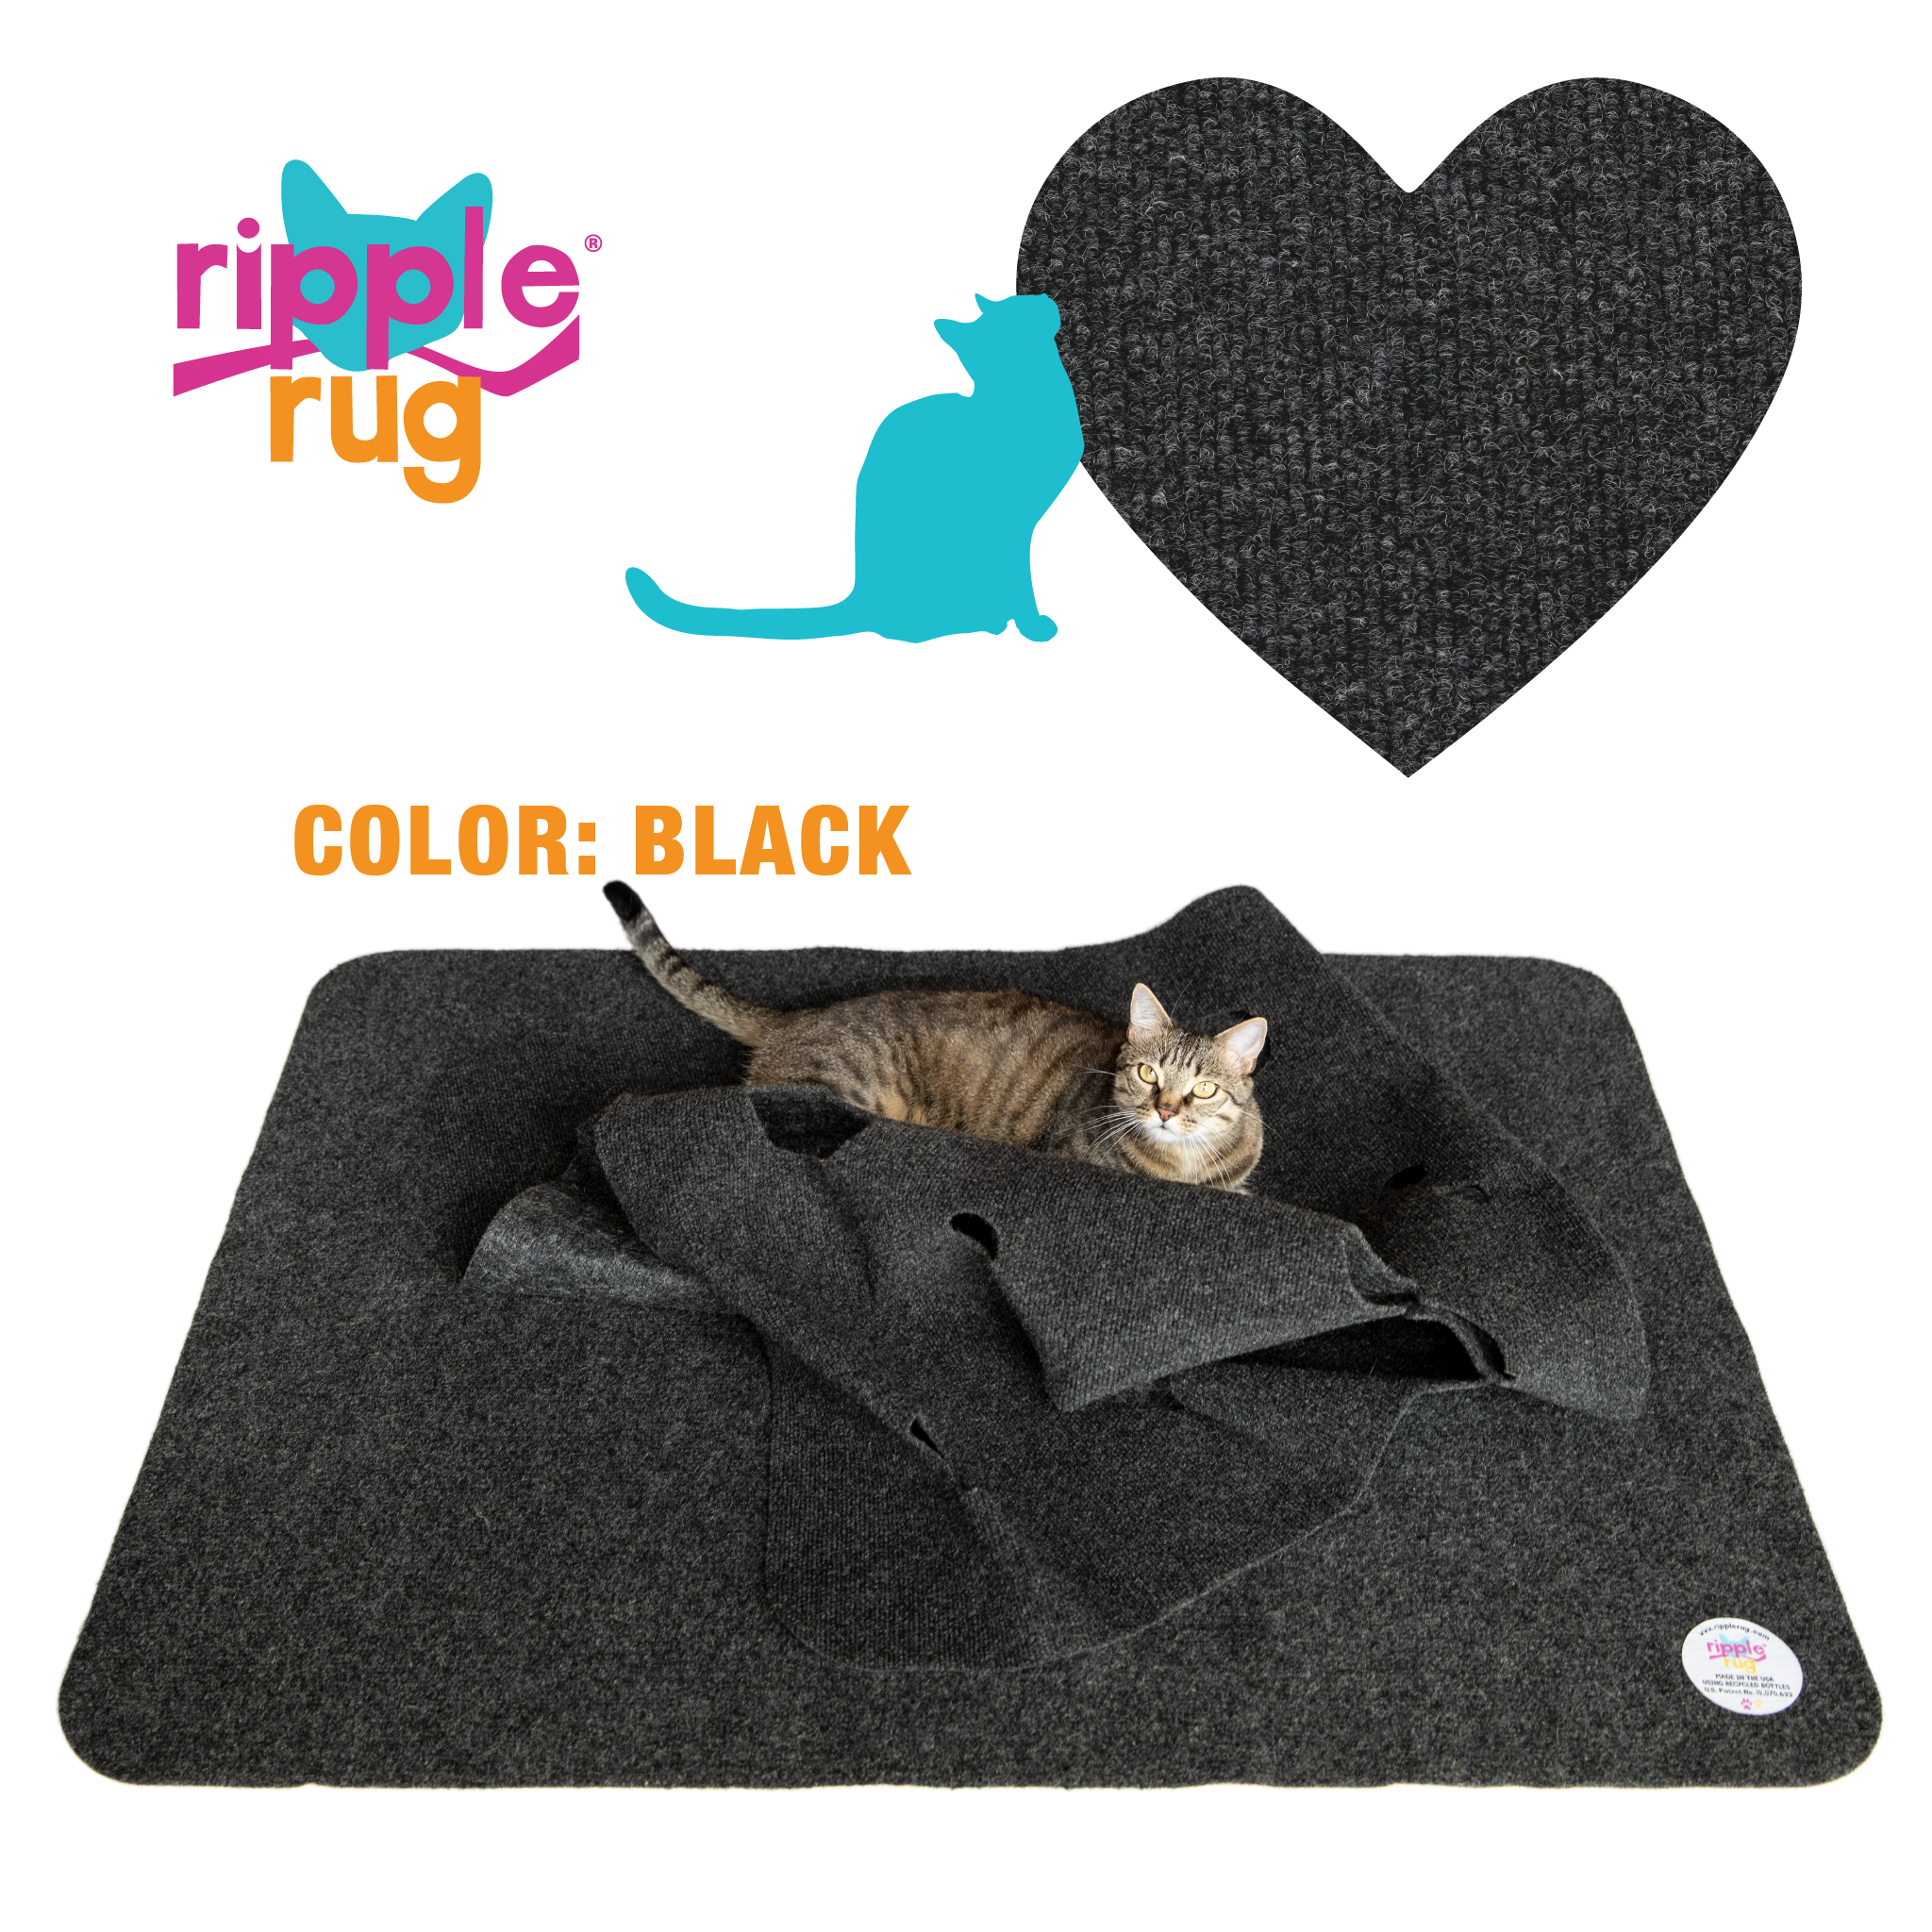 THE RIPPLE RUG Cole and Marmalade Offer